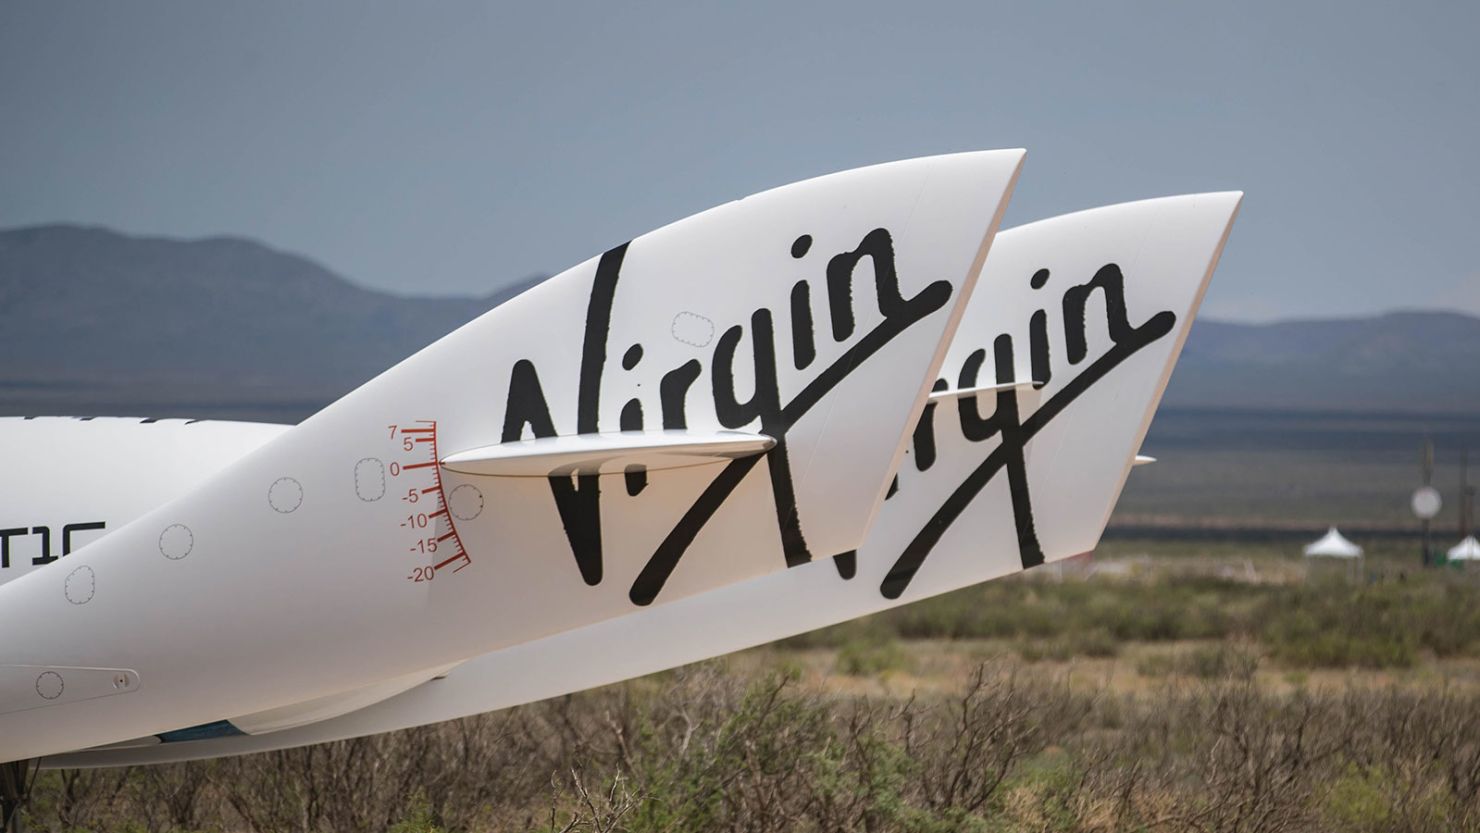 A replica of Virgin Galactic's rocket plane sits at the entrance of Spaceport America in Sierra County, New Mexico, on July 8, 2021.